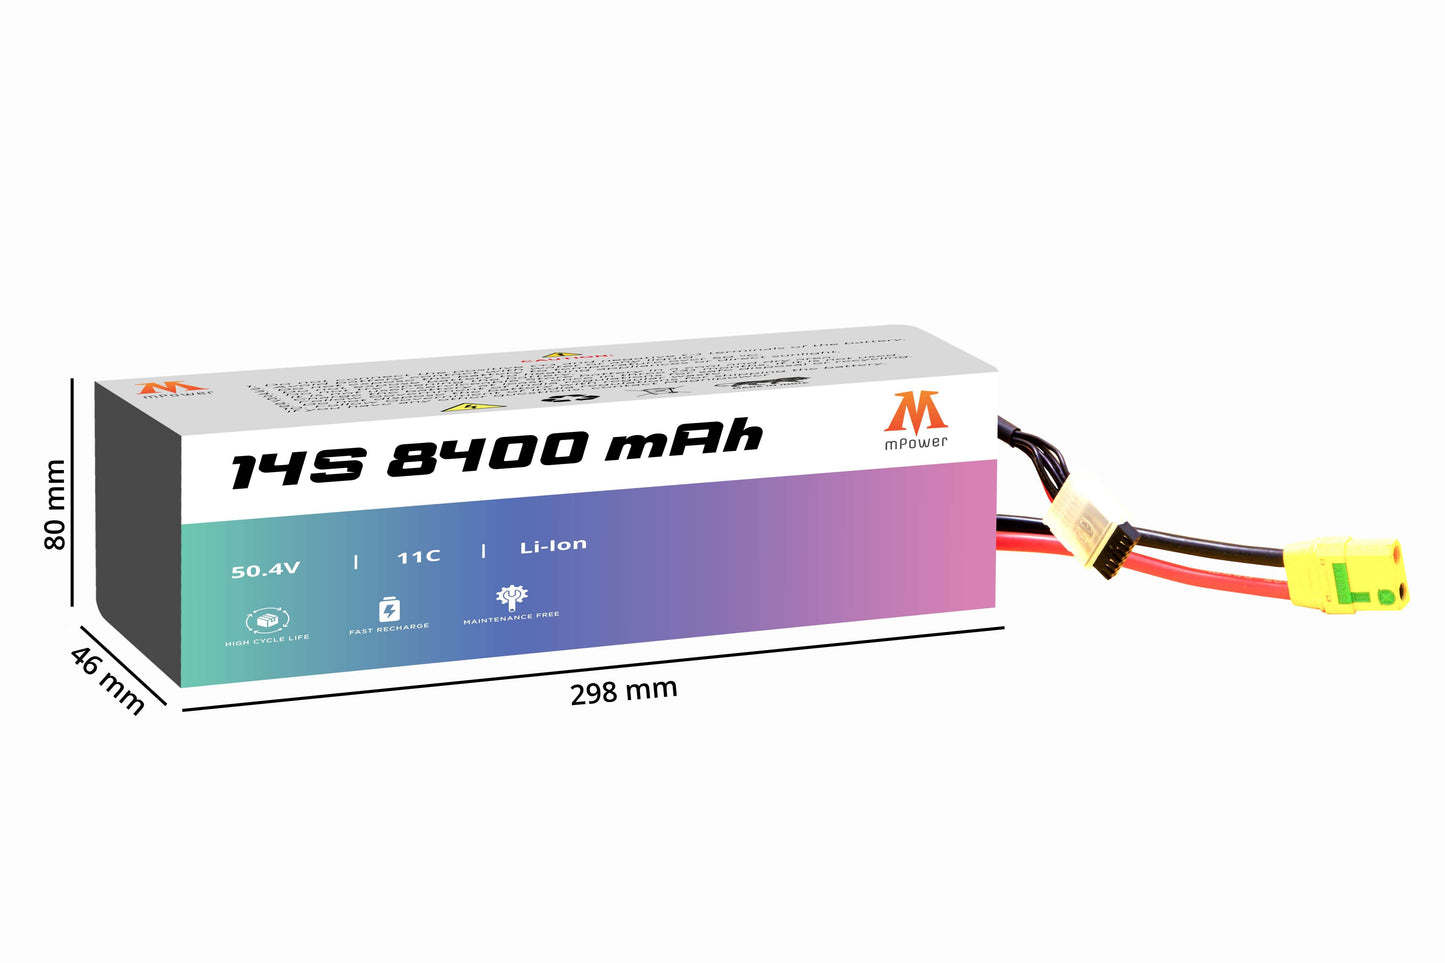 mPower 14S 8400mAh Lithium-Ion Battery for surveillance Drones